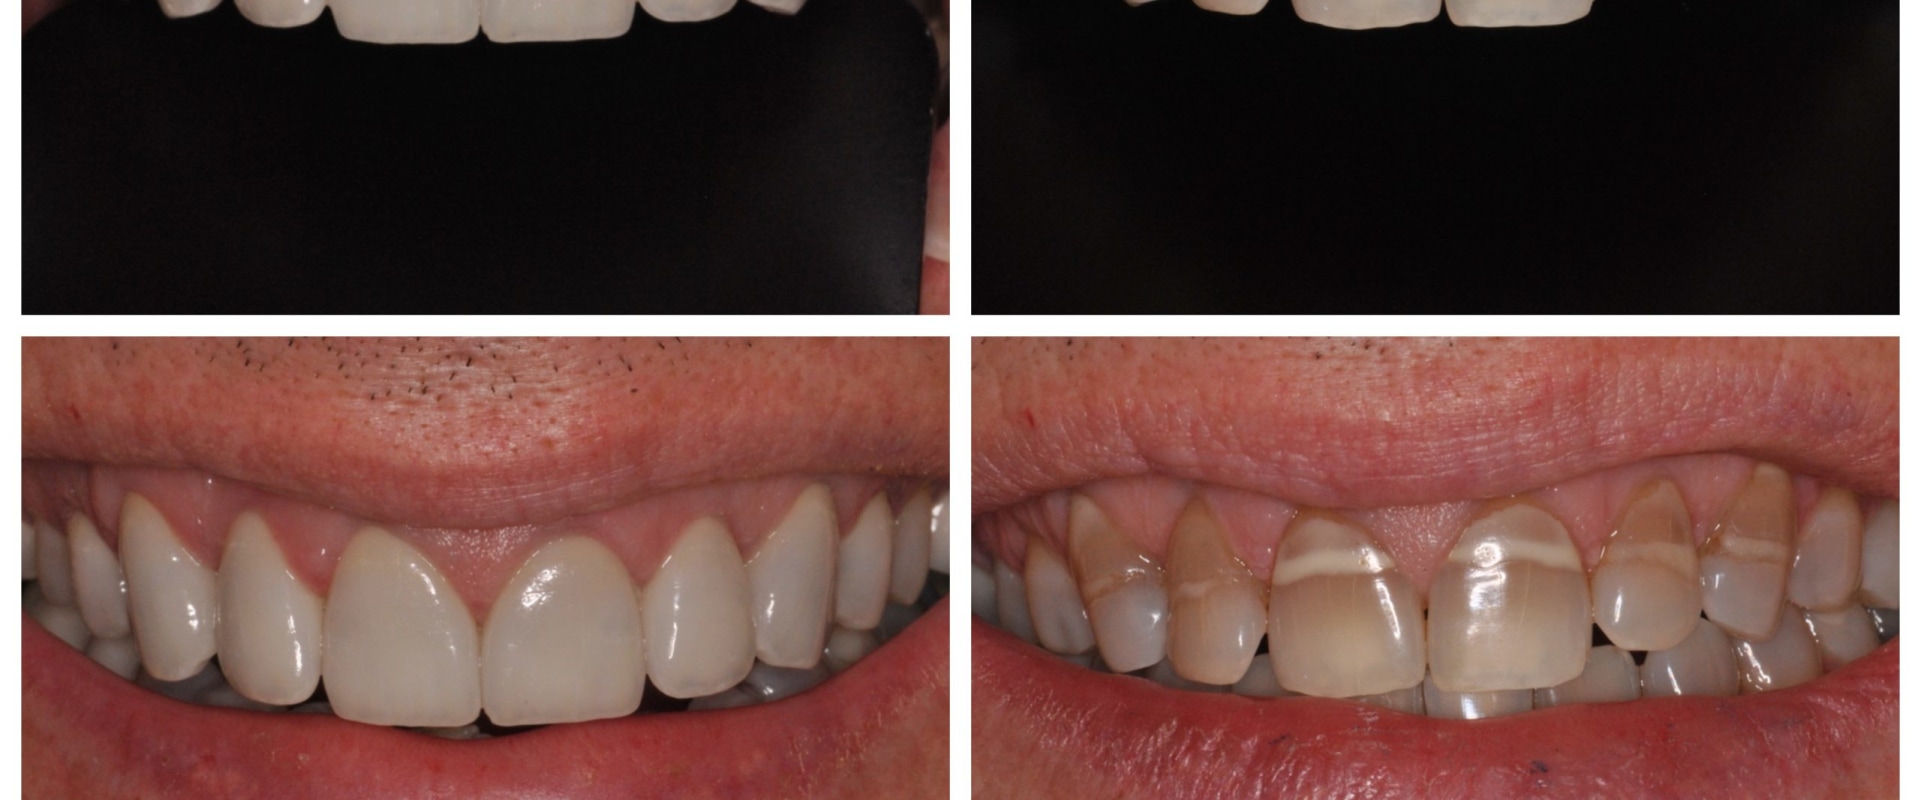 Smile Makeover: Get Rid of Stained Teeth and Enjoy a Beautiful New Smile